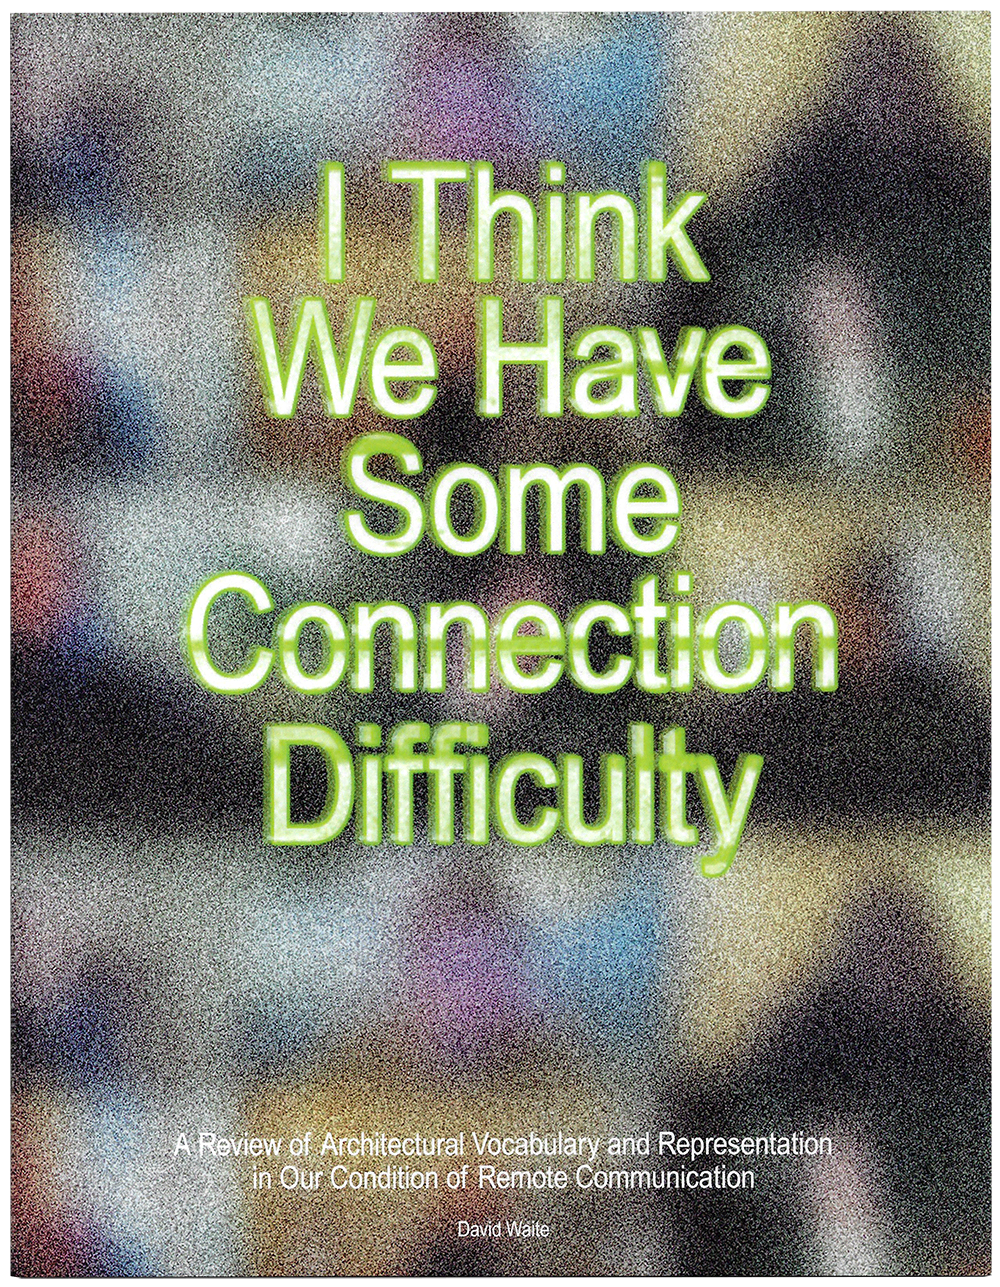 cover of book with blurry zoom screen overlayed with bright green, grainy type